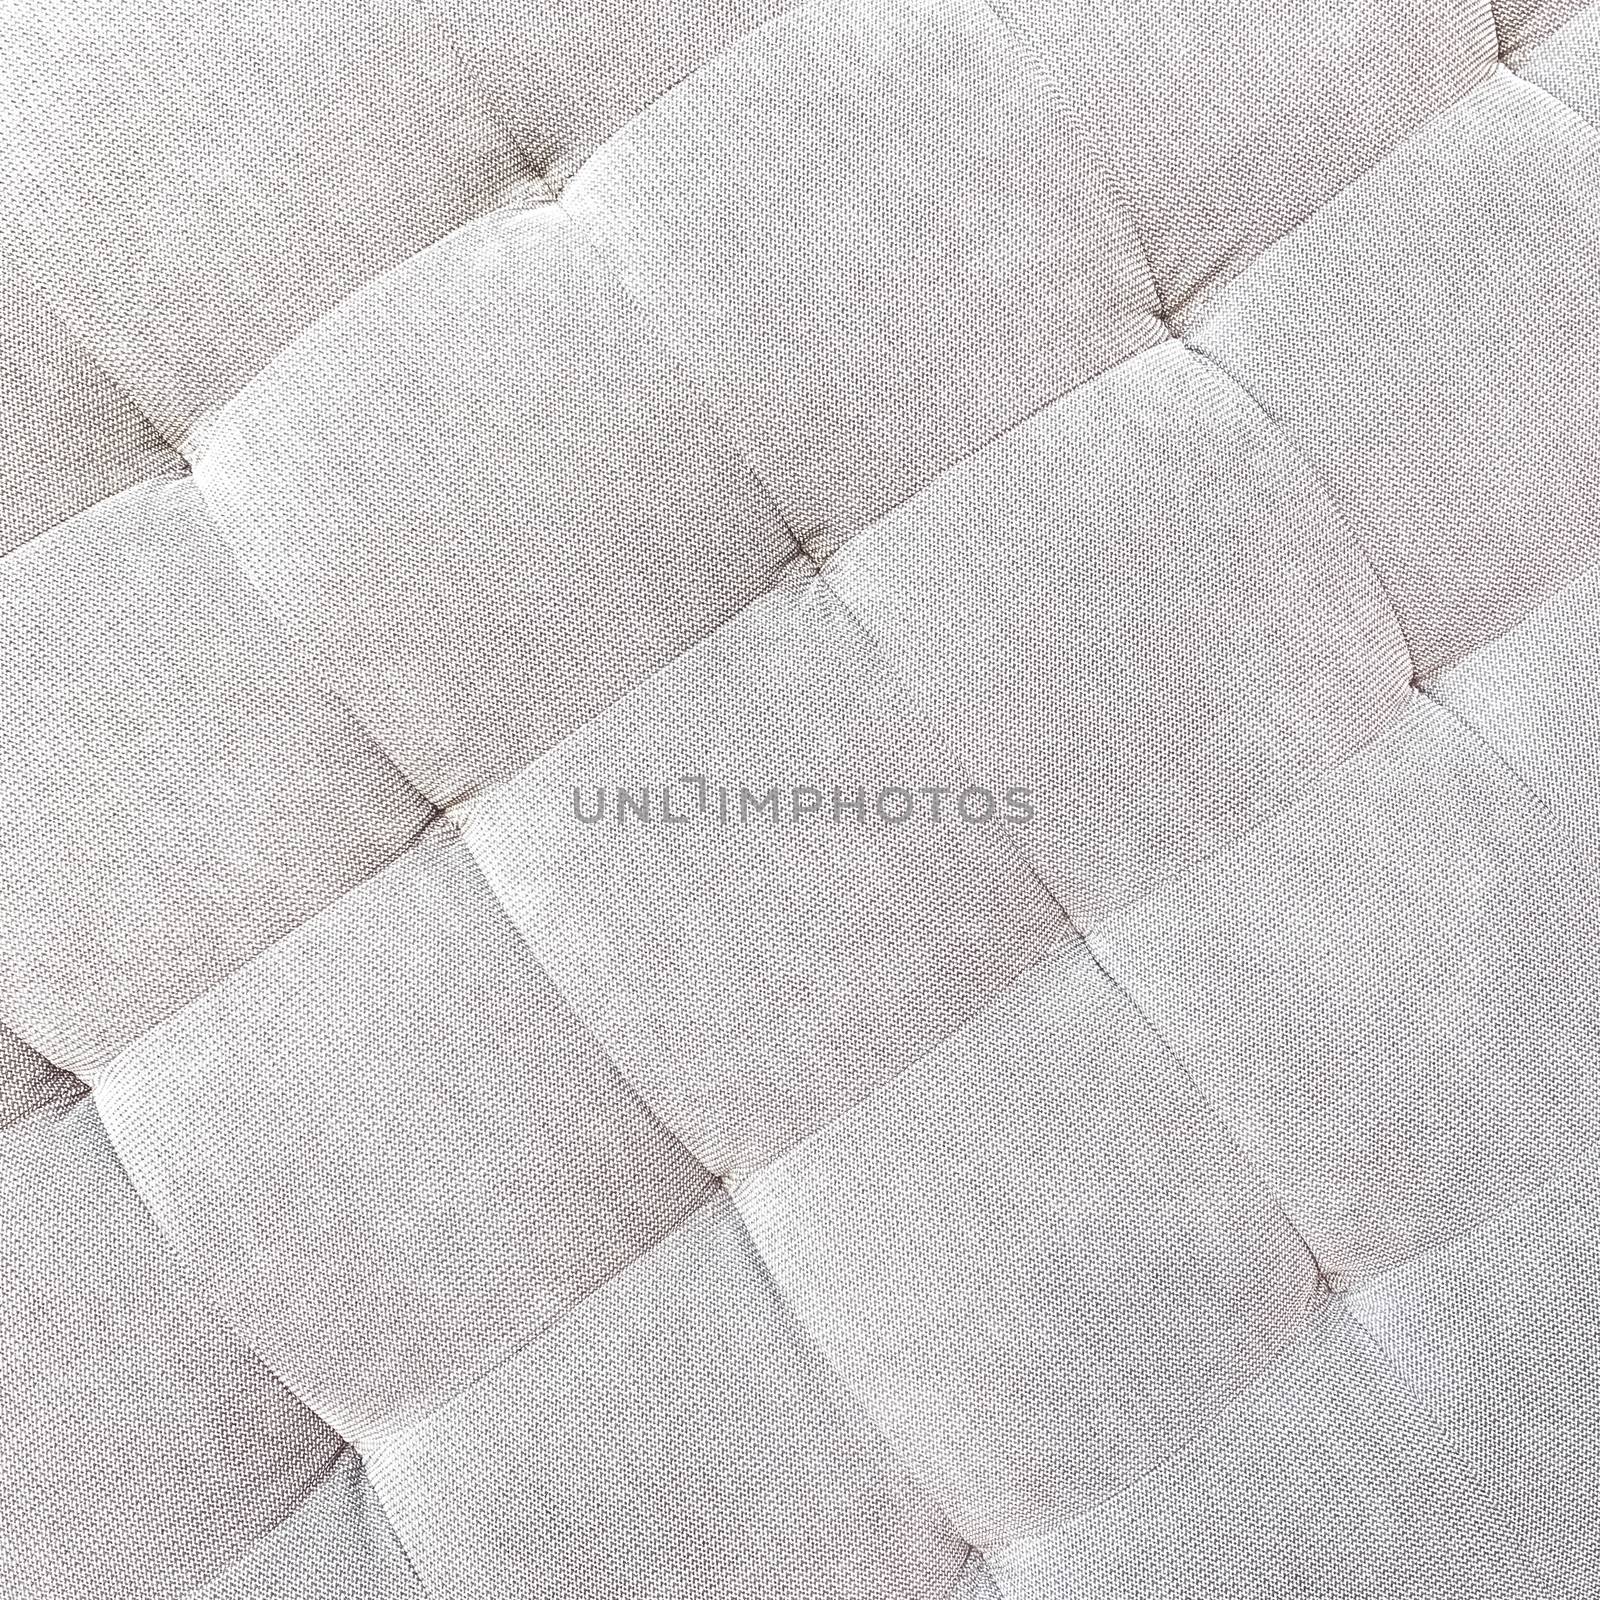 Gray buttoned fabric background by anikasalsera